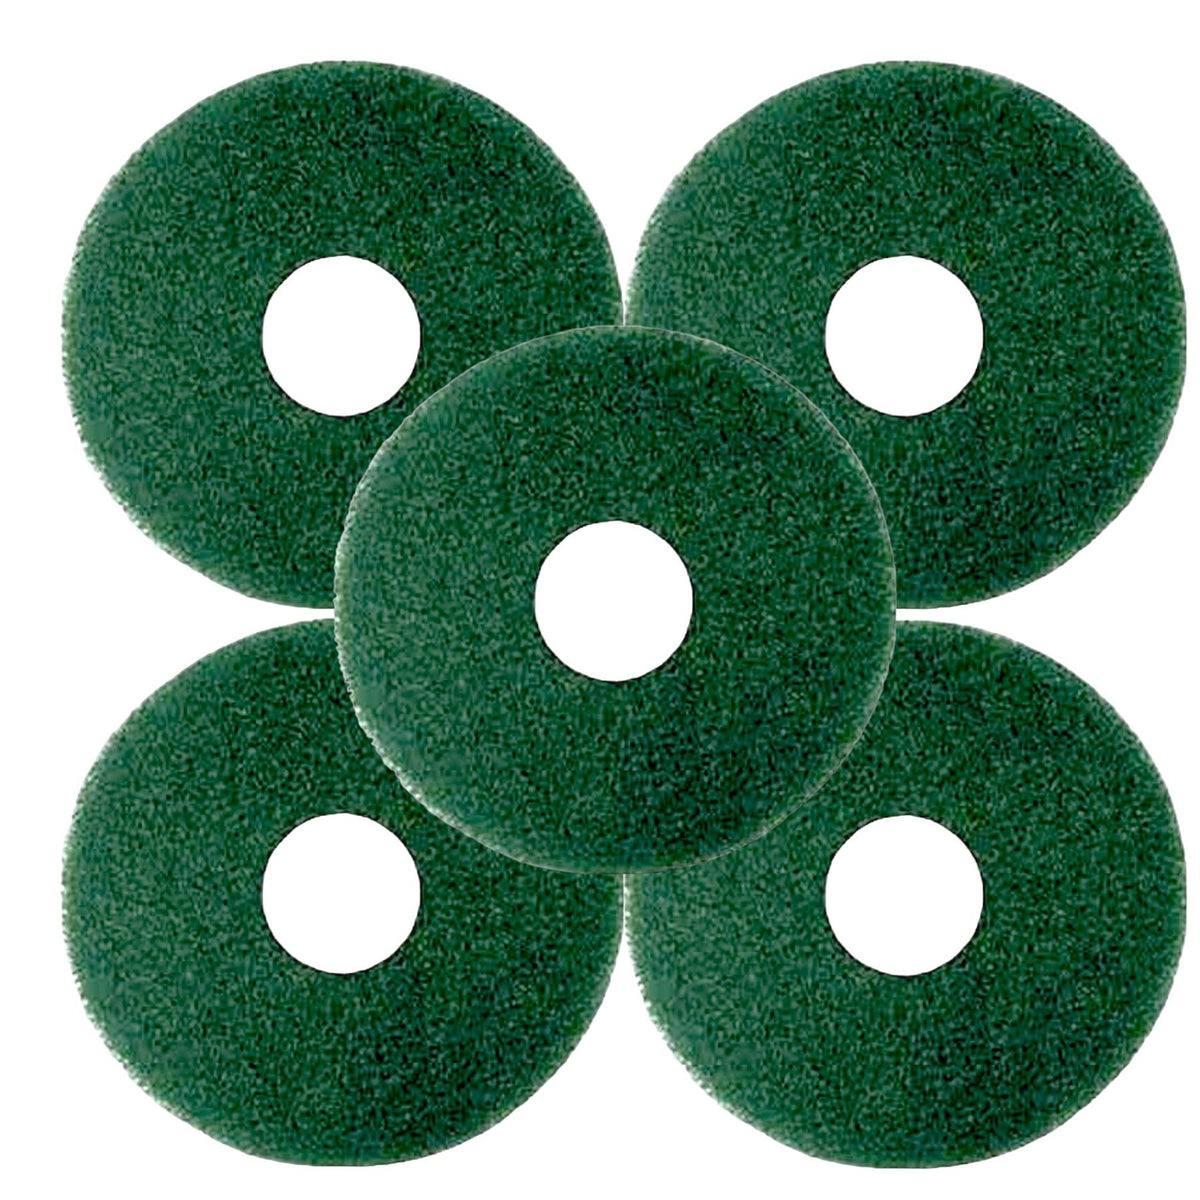 Green Floor Pads Pack of 5 16 inch Pads For Machine Buffing